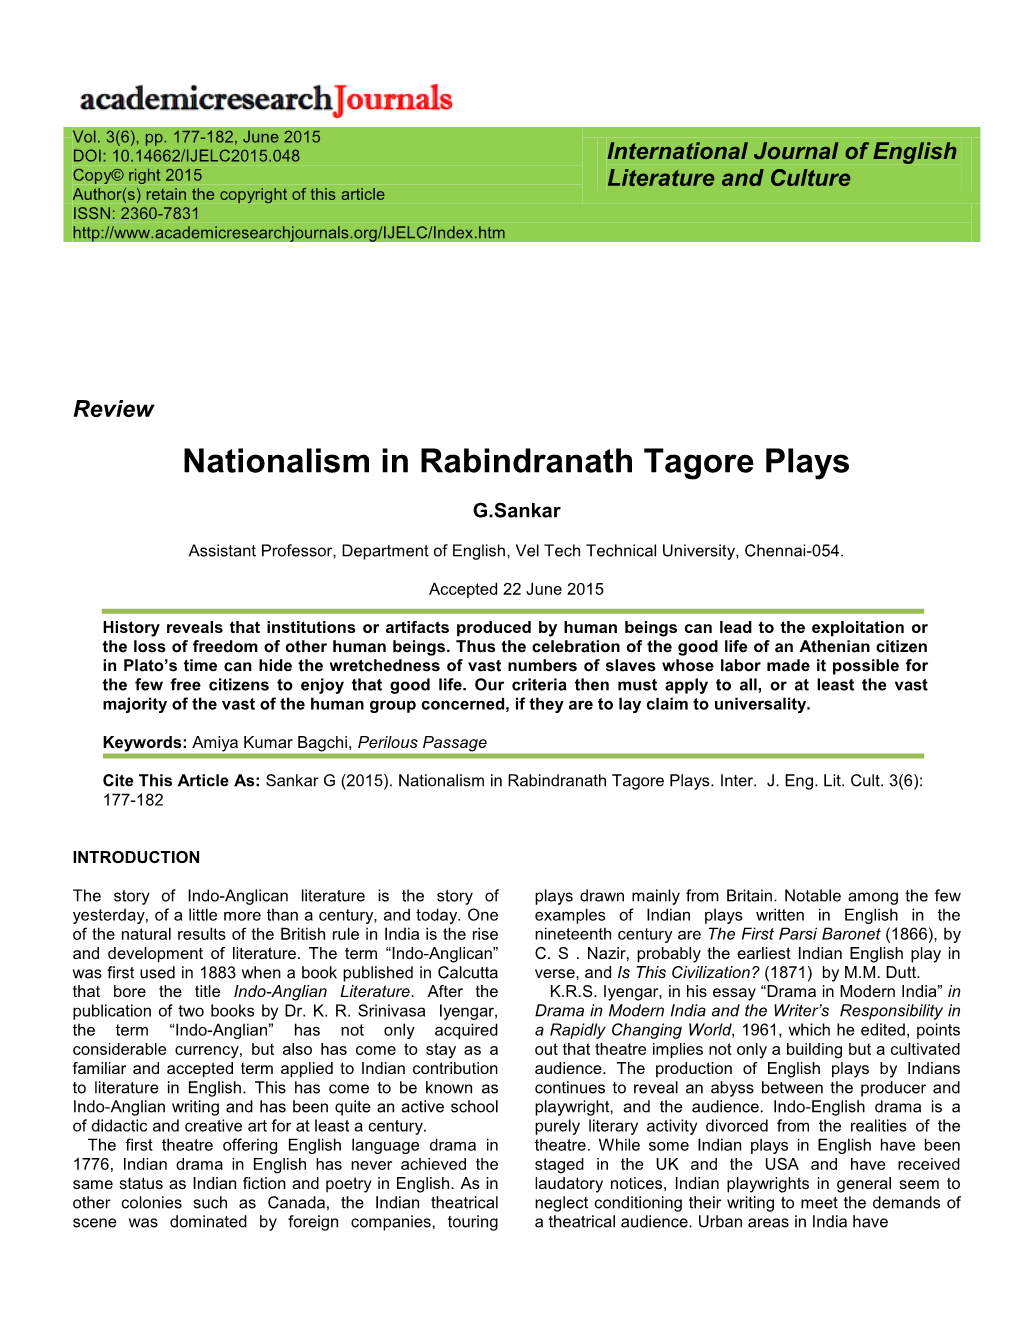 Nationalism in Rabindranath Tagore Plays